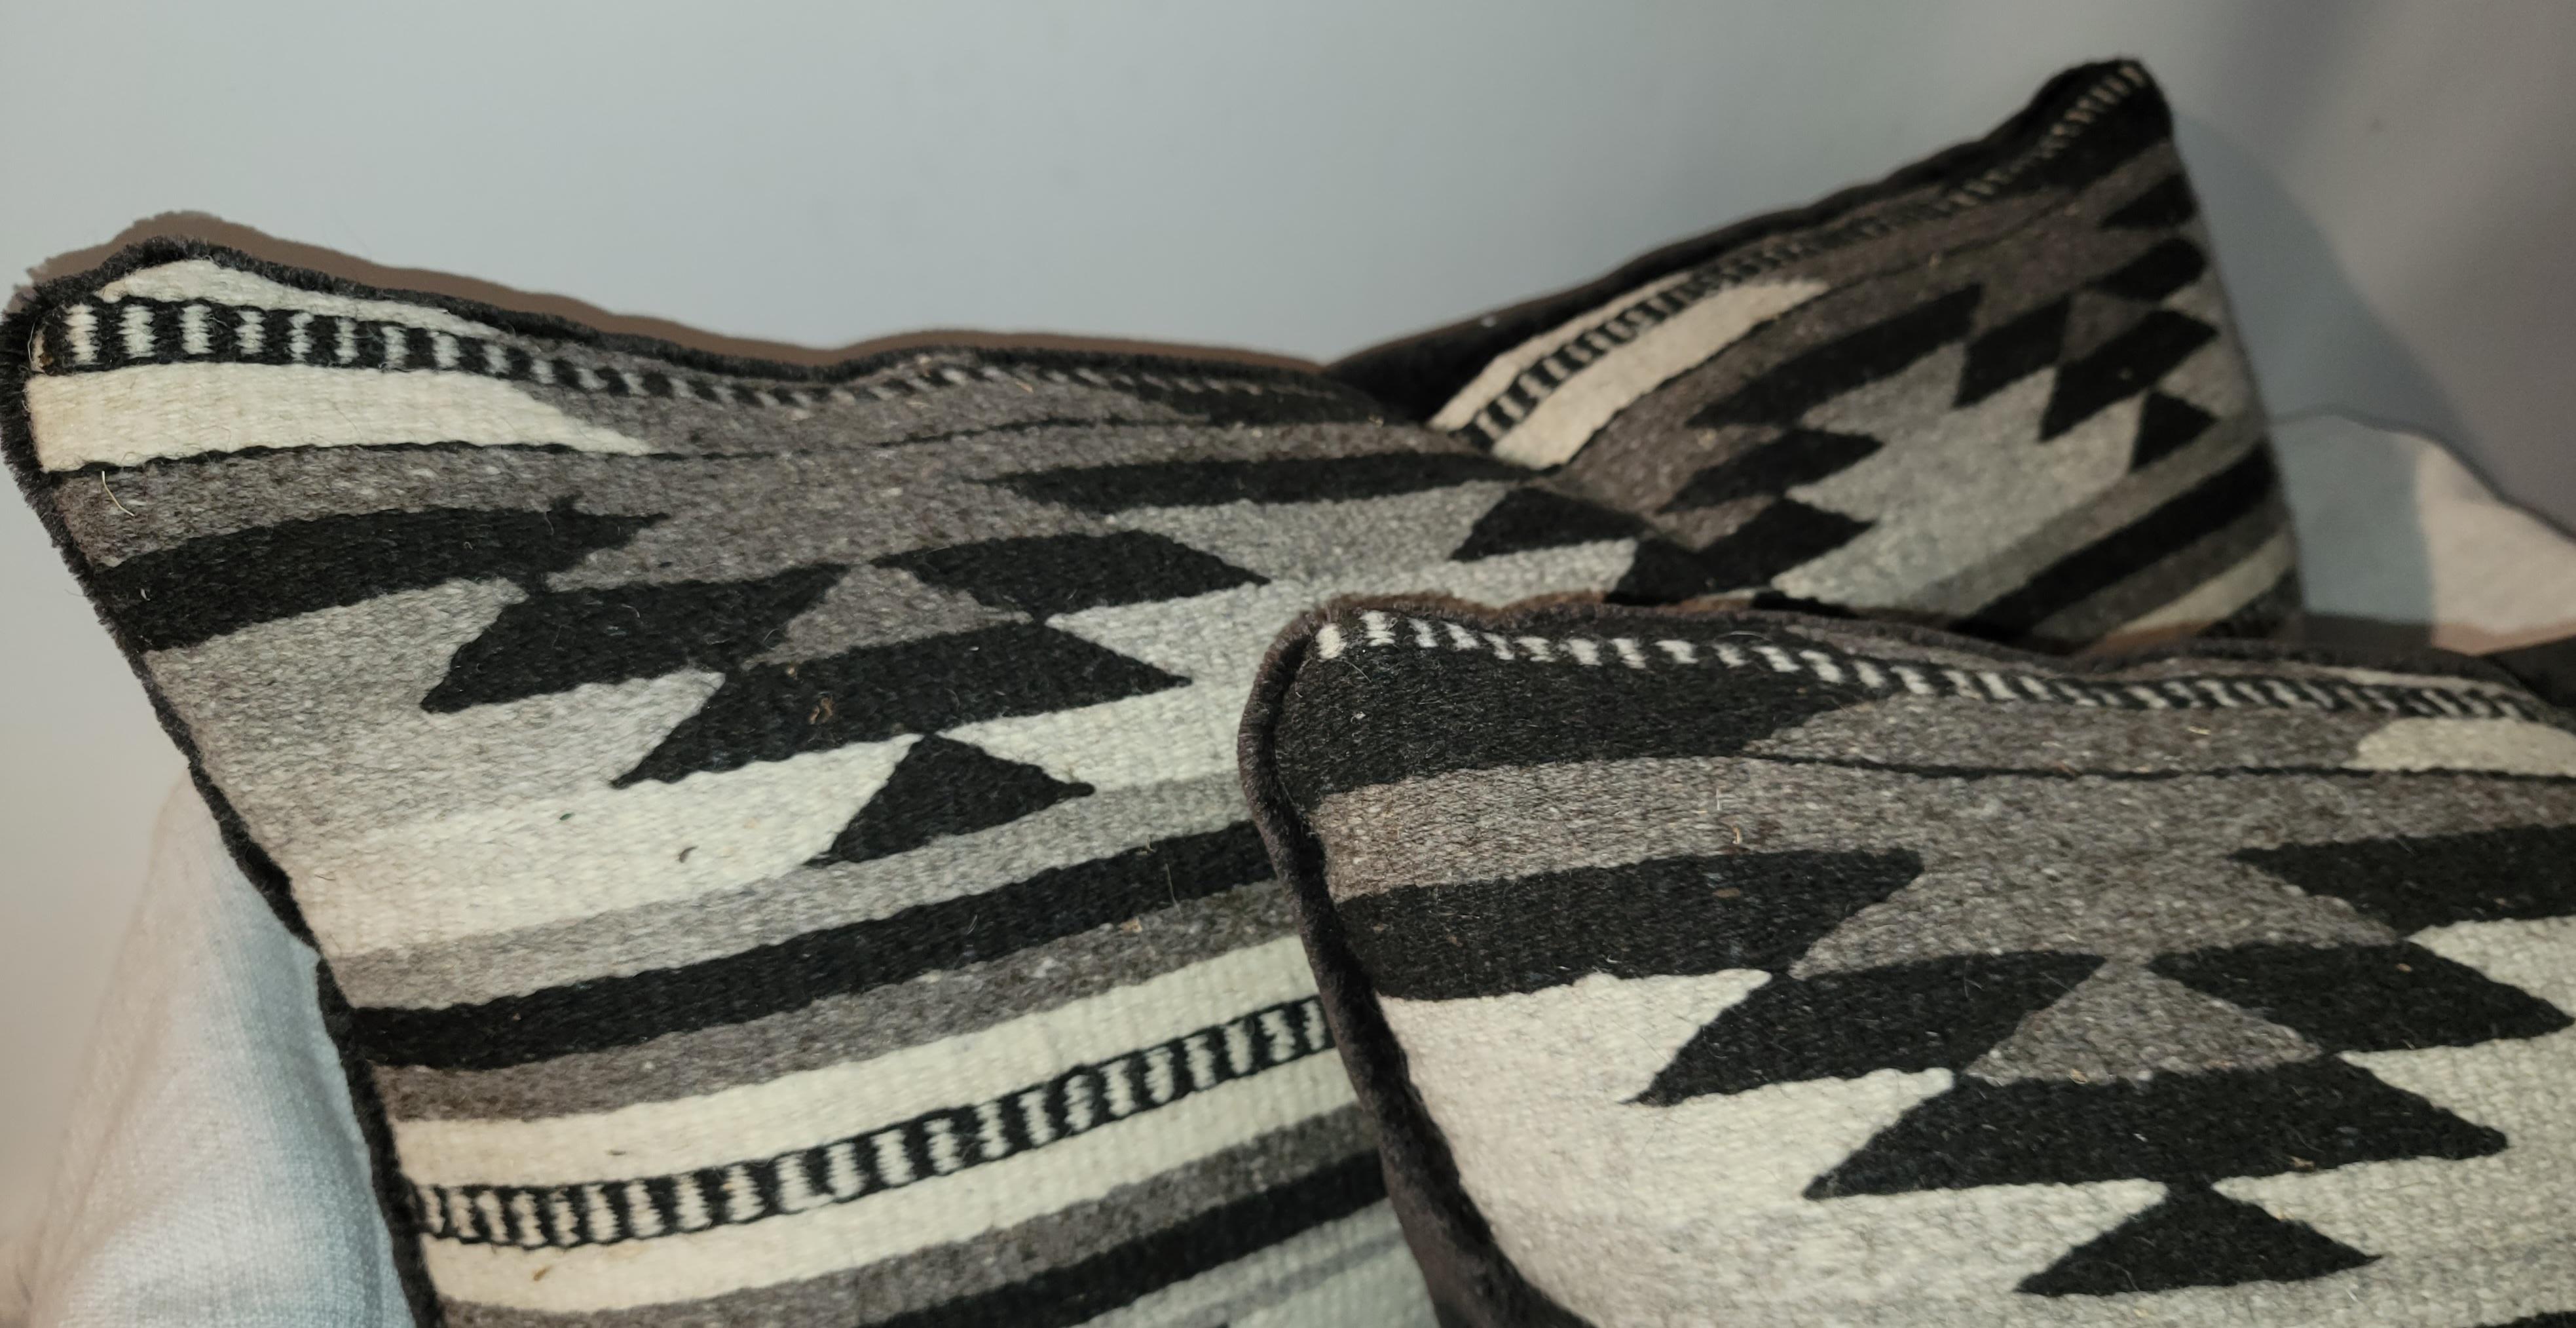 Pair of beautiful Navajo Indian weaving bolster pillows. Feather and down inserts. Zippered casing.